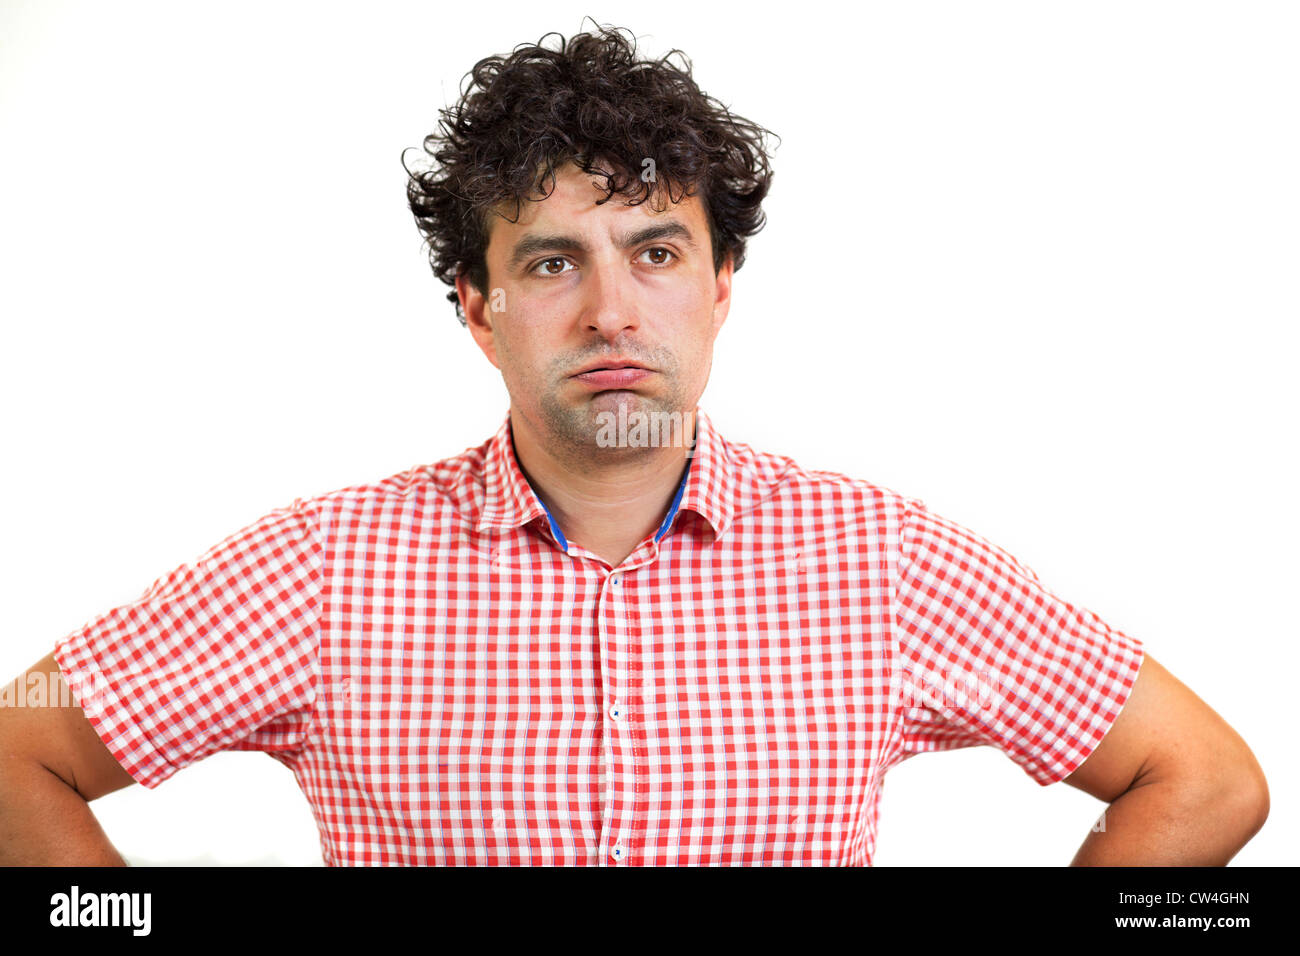 Man looking bored or exasperated, isolated on white background Stock Photo